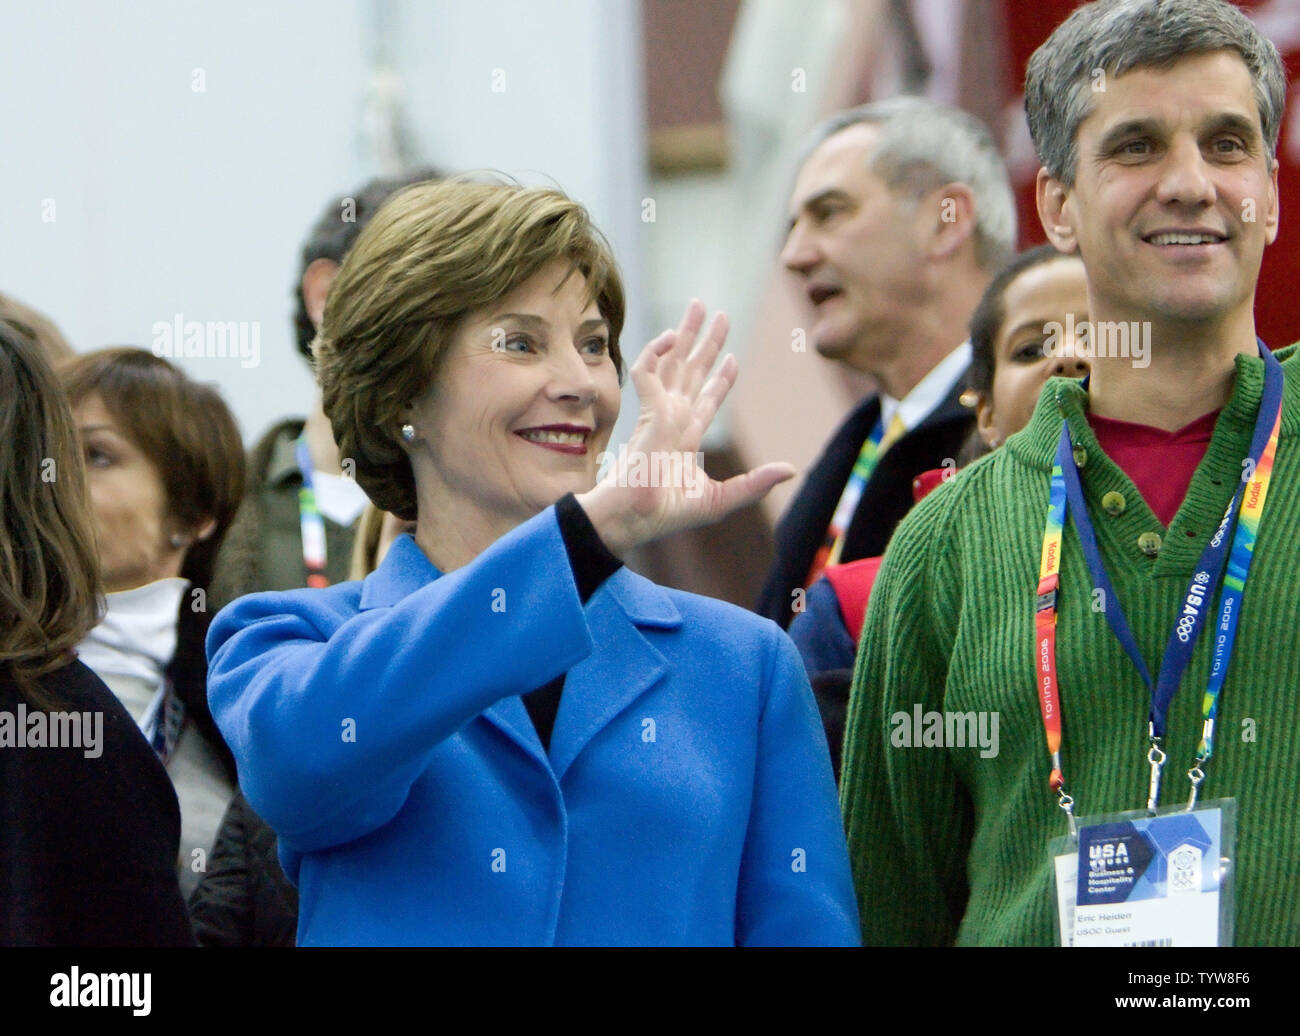 Laura Bush with Eric Heiden, attends the men's 5000m speed skating at Oval Lingotto during the 2006 Torino Winter Olympic Games, February 11, 2006, where Chad Hedrick of the USA won gold.  (UPI Photo/Heinz Ruckemann) Stock Photo